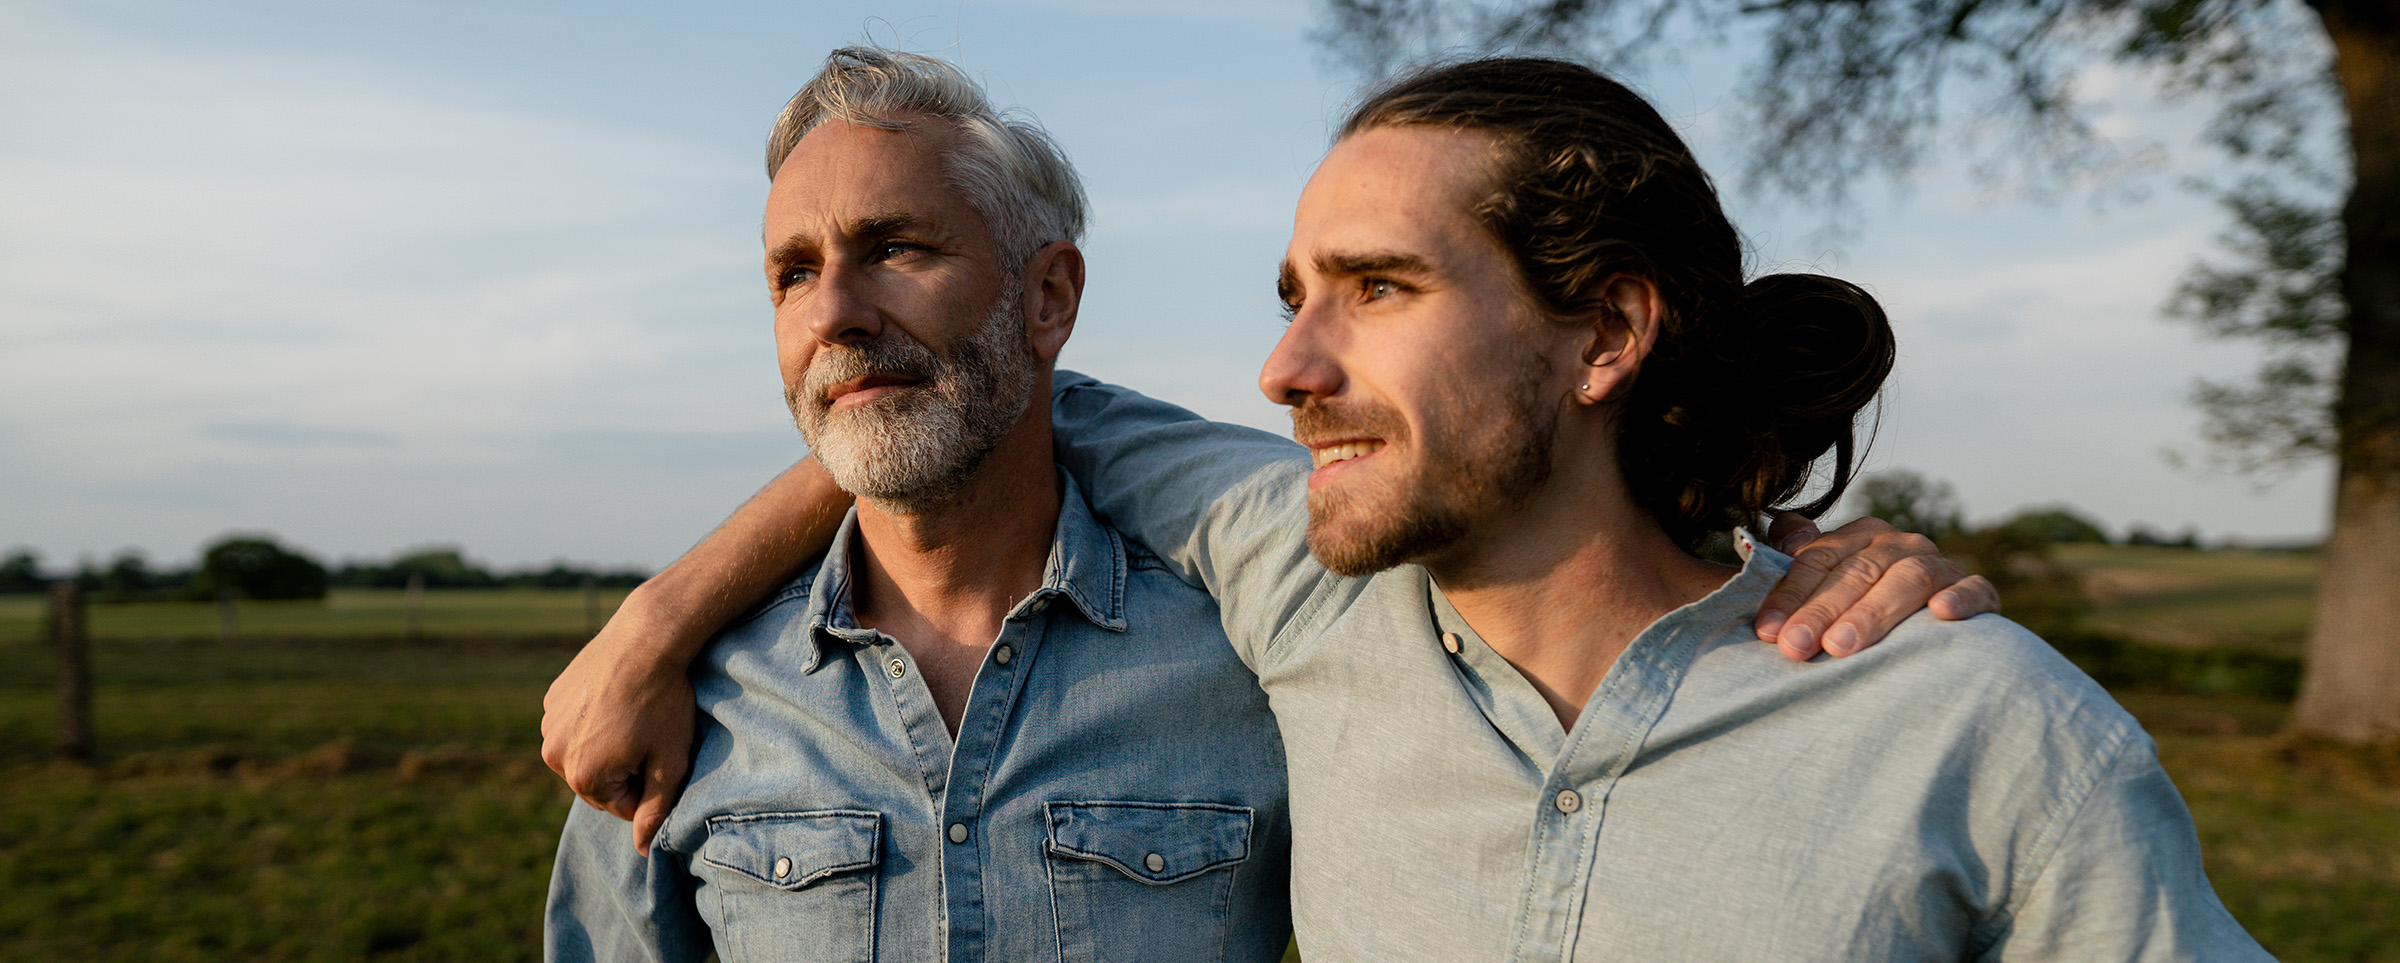 Two men stand side-by-side with their arms on each other’s shoulders outside with a field and tree behind them staring into the distance. The young man with long brown hair pulled back and a beard is wearing a blue button-down shirt. The older man with gray hair and a beard wears a jean button-down shirt.